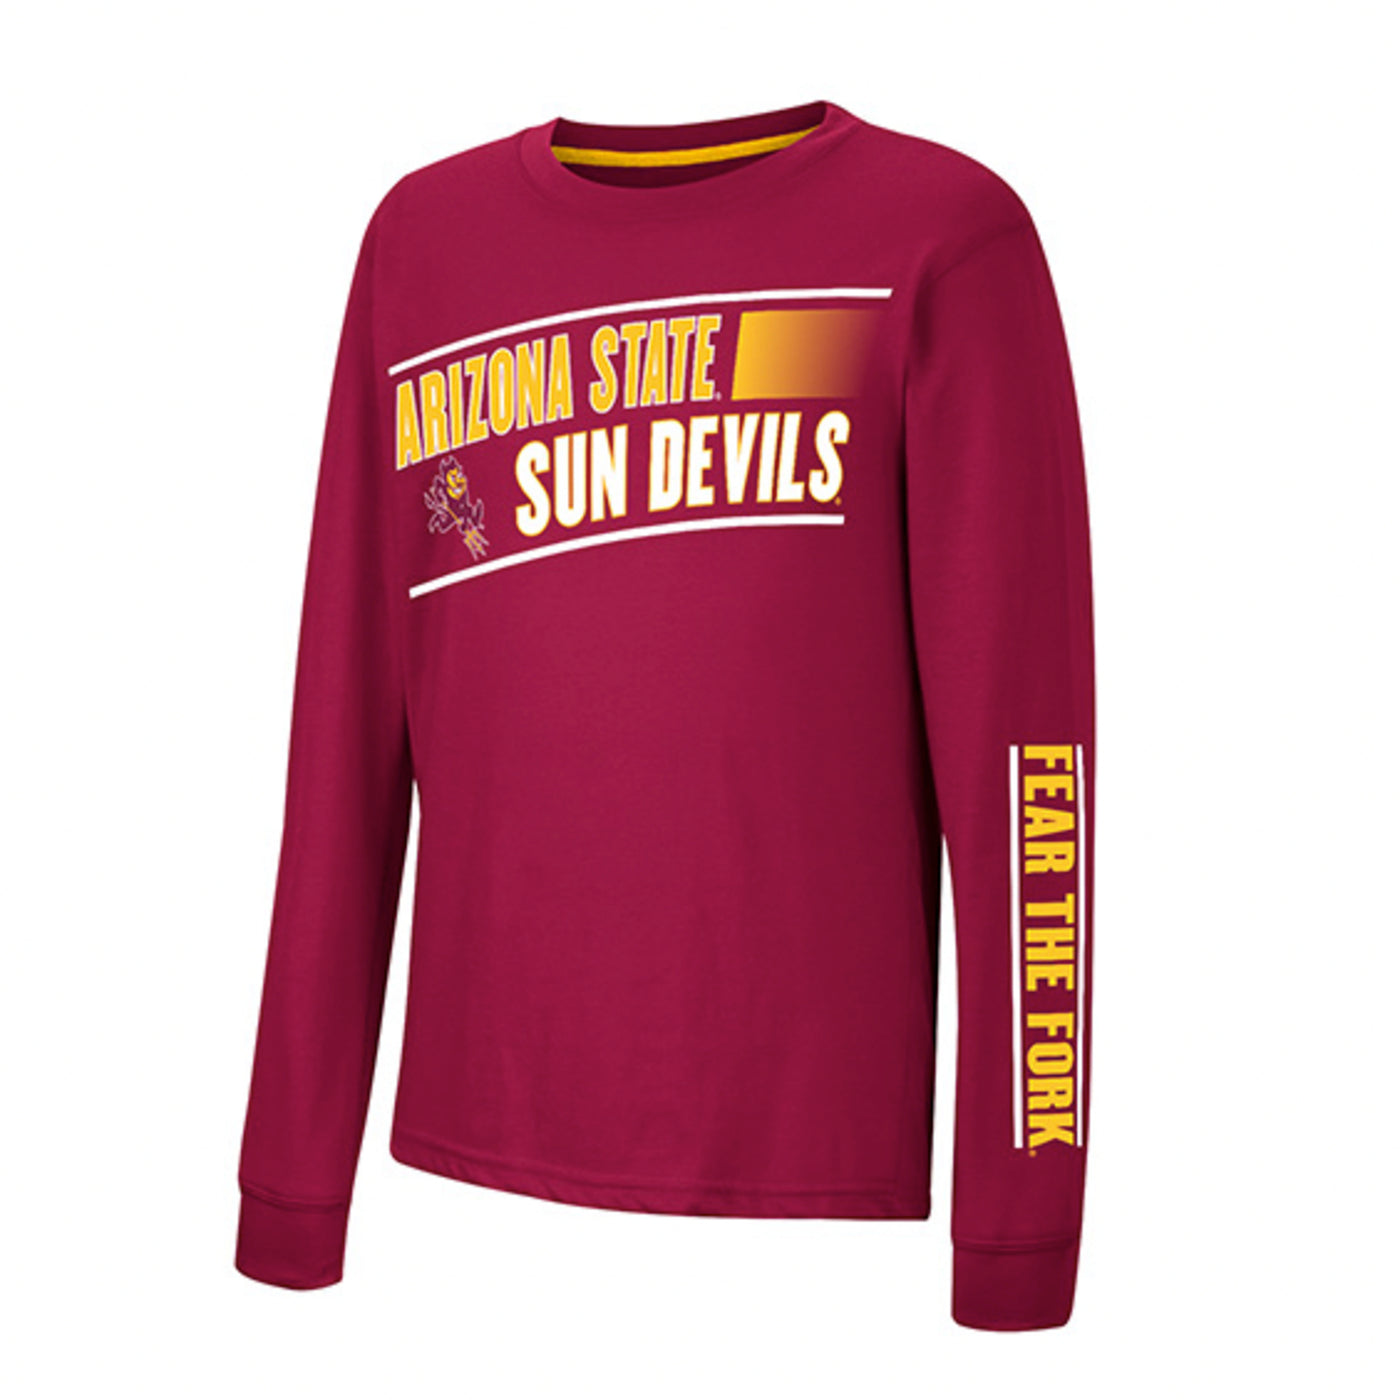 ASU Maroon Long Sleeve. Features Arizona State Sundevils text with Sparky on the chest. Fear the Fork text in gold is featured on the left sleeve. 